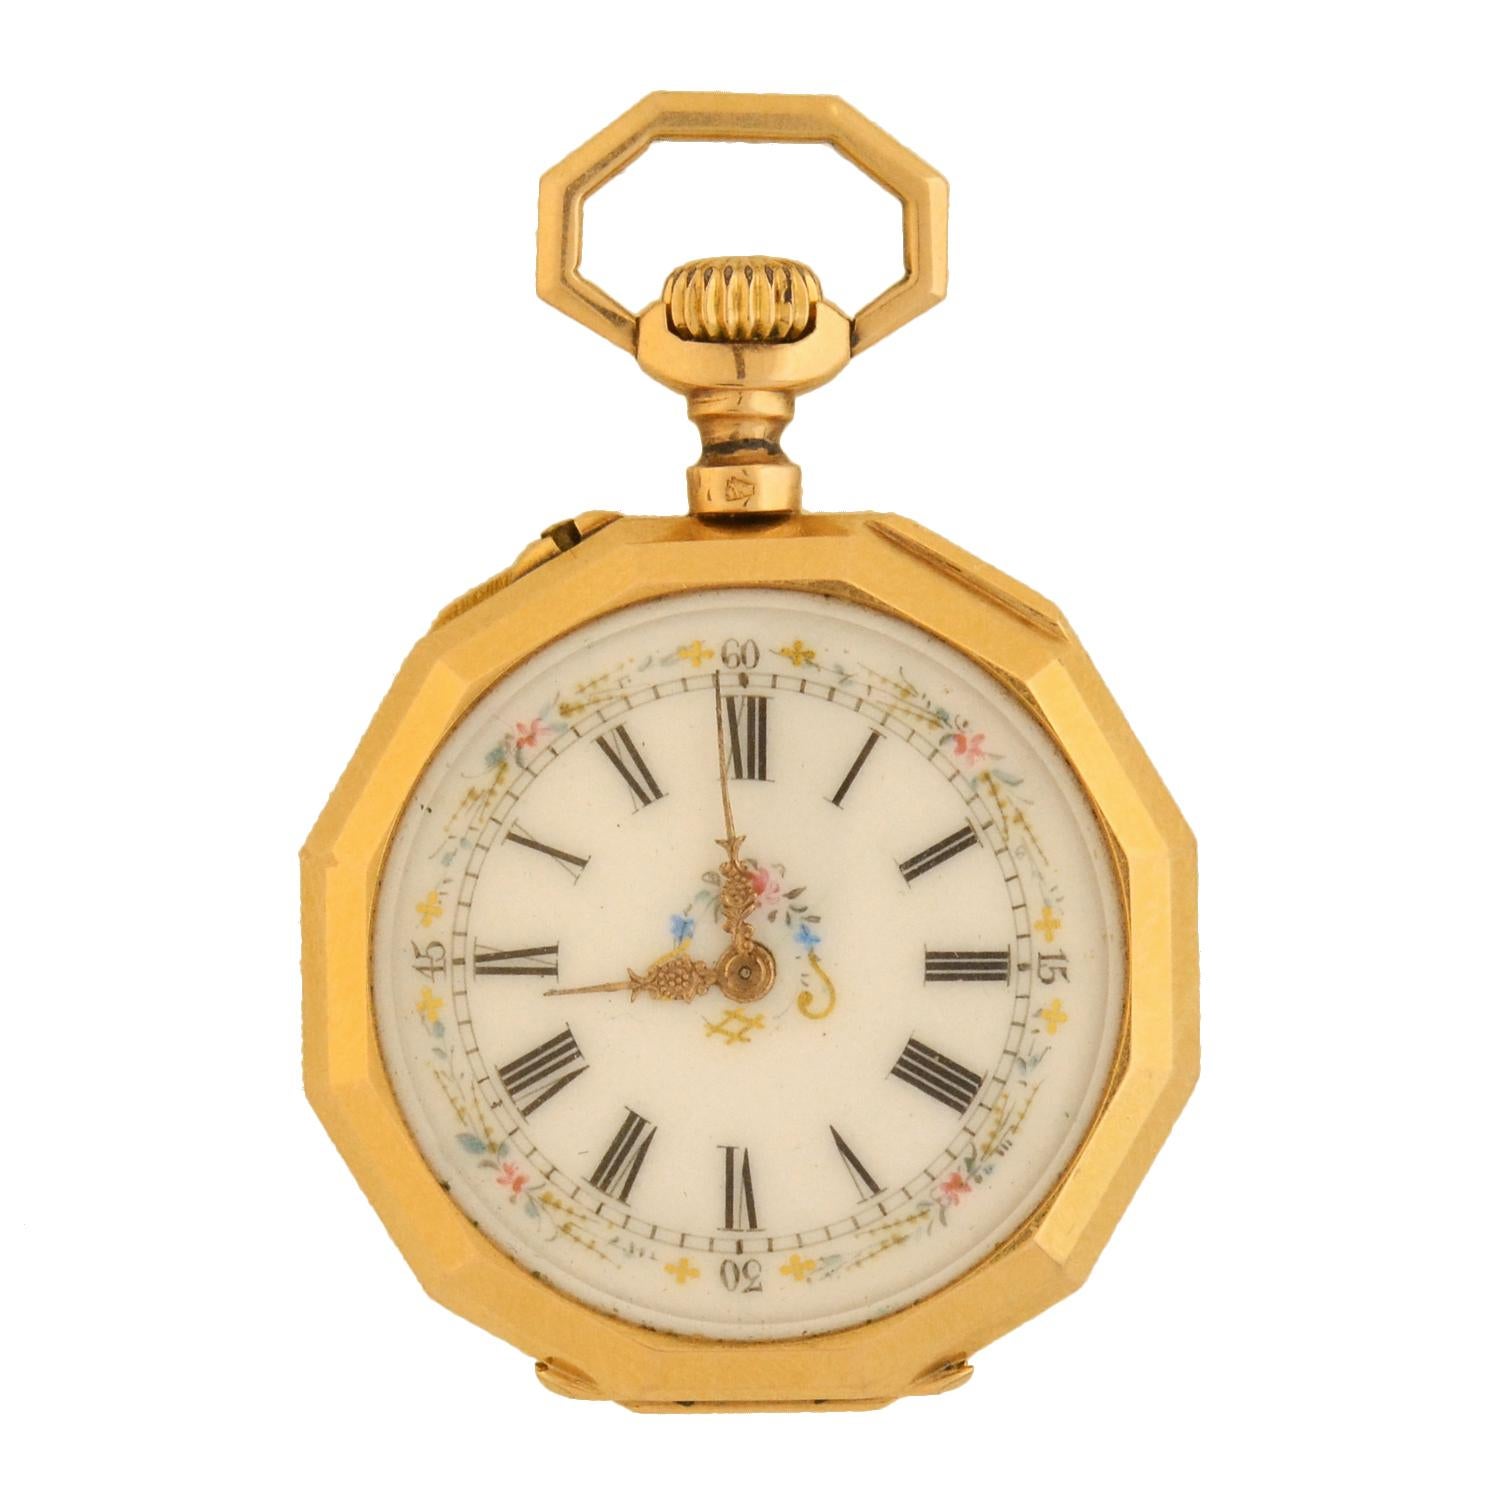 A gorgeous and unusual French pocket watch from the Victorian (ca1880) era! Crafted in 18kt yellow gold, this piece is decorated with an amusing cherub motif on one side, and a glass covered watch face on the other. The image depicts a charming